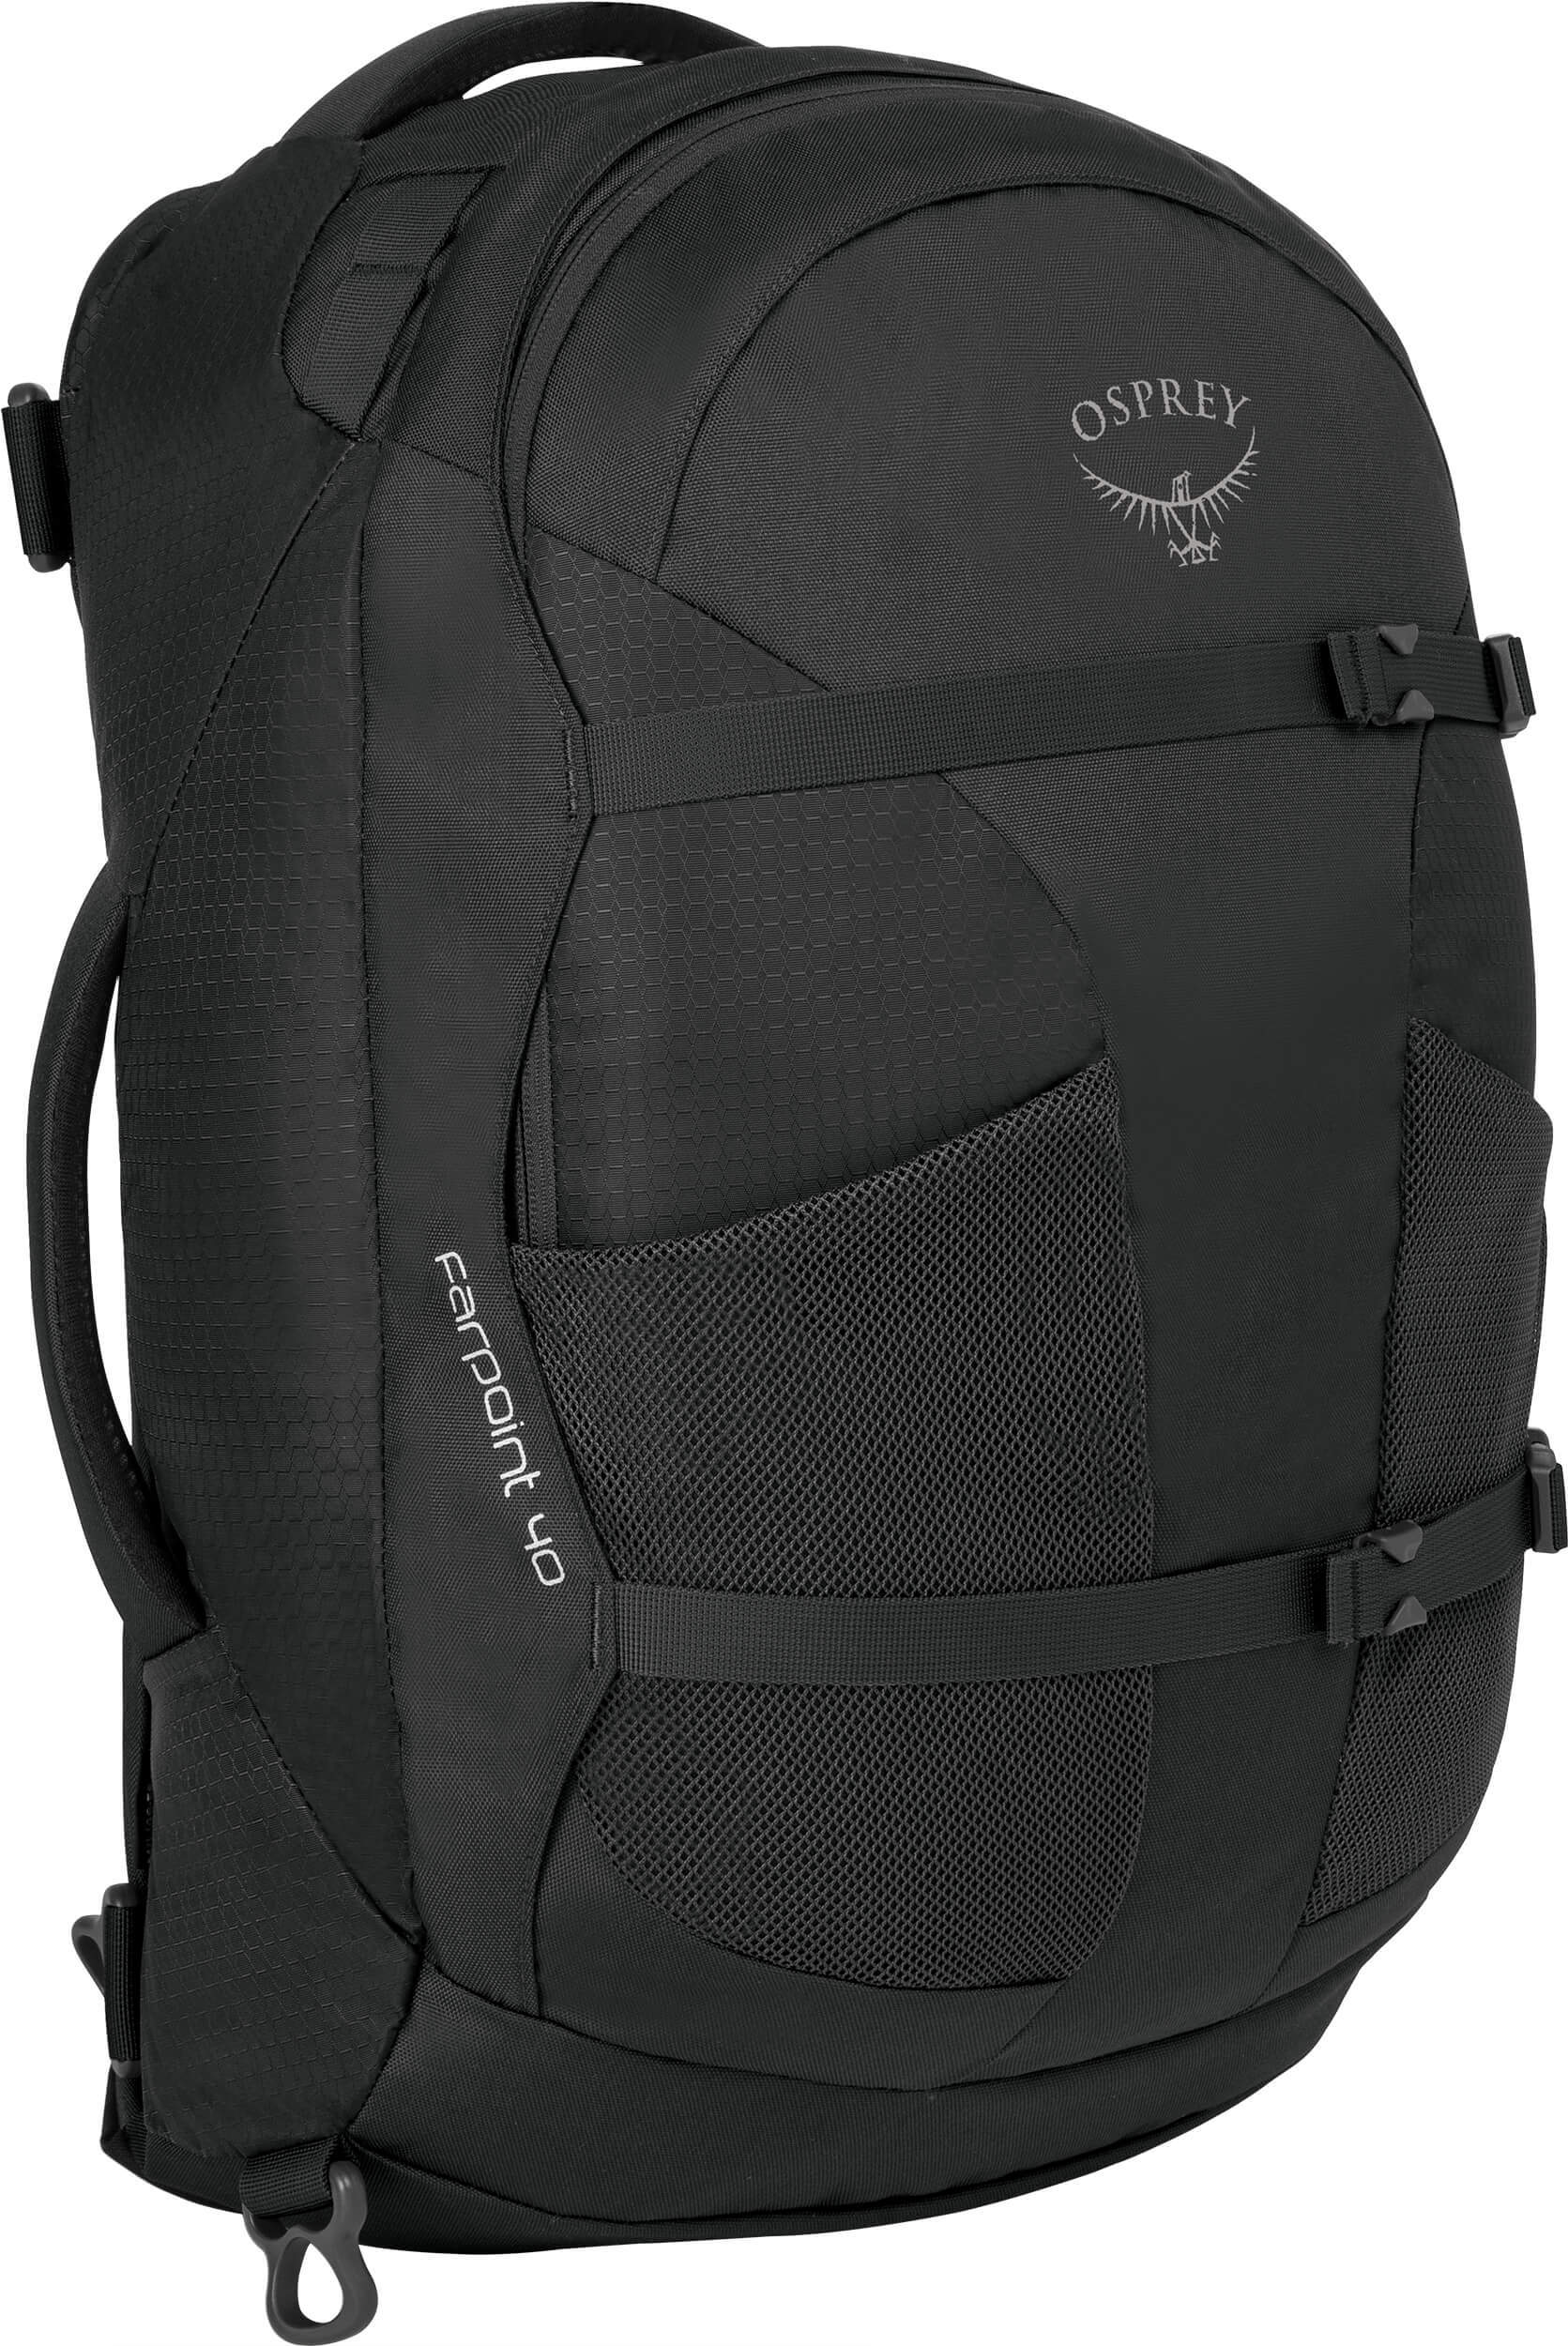 Best carry on travel bags Osprey Farpoint 40